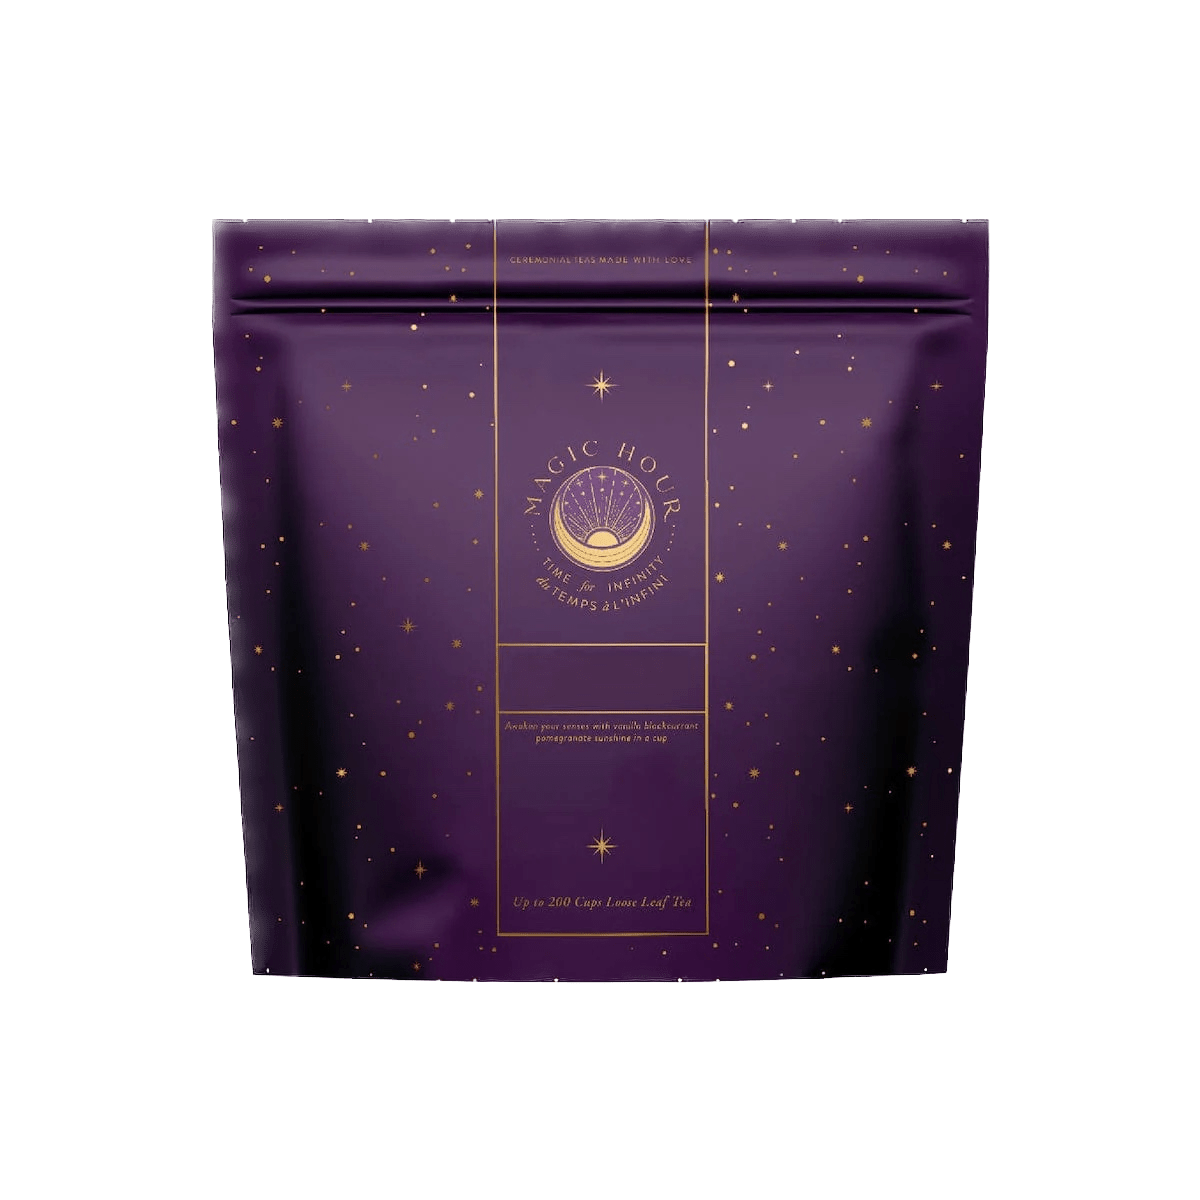 Amethyst: Strawberry-Passionfruit Gemstone Wellness Tea-Bulk Pouch (1lb - Up to 200 Cups!)-Magic Hour